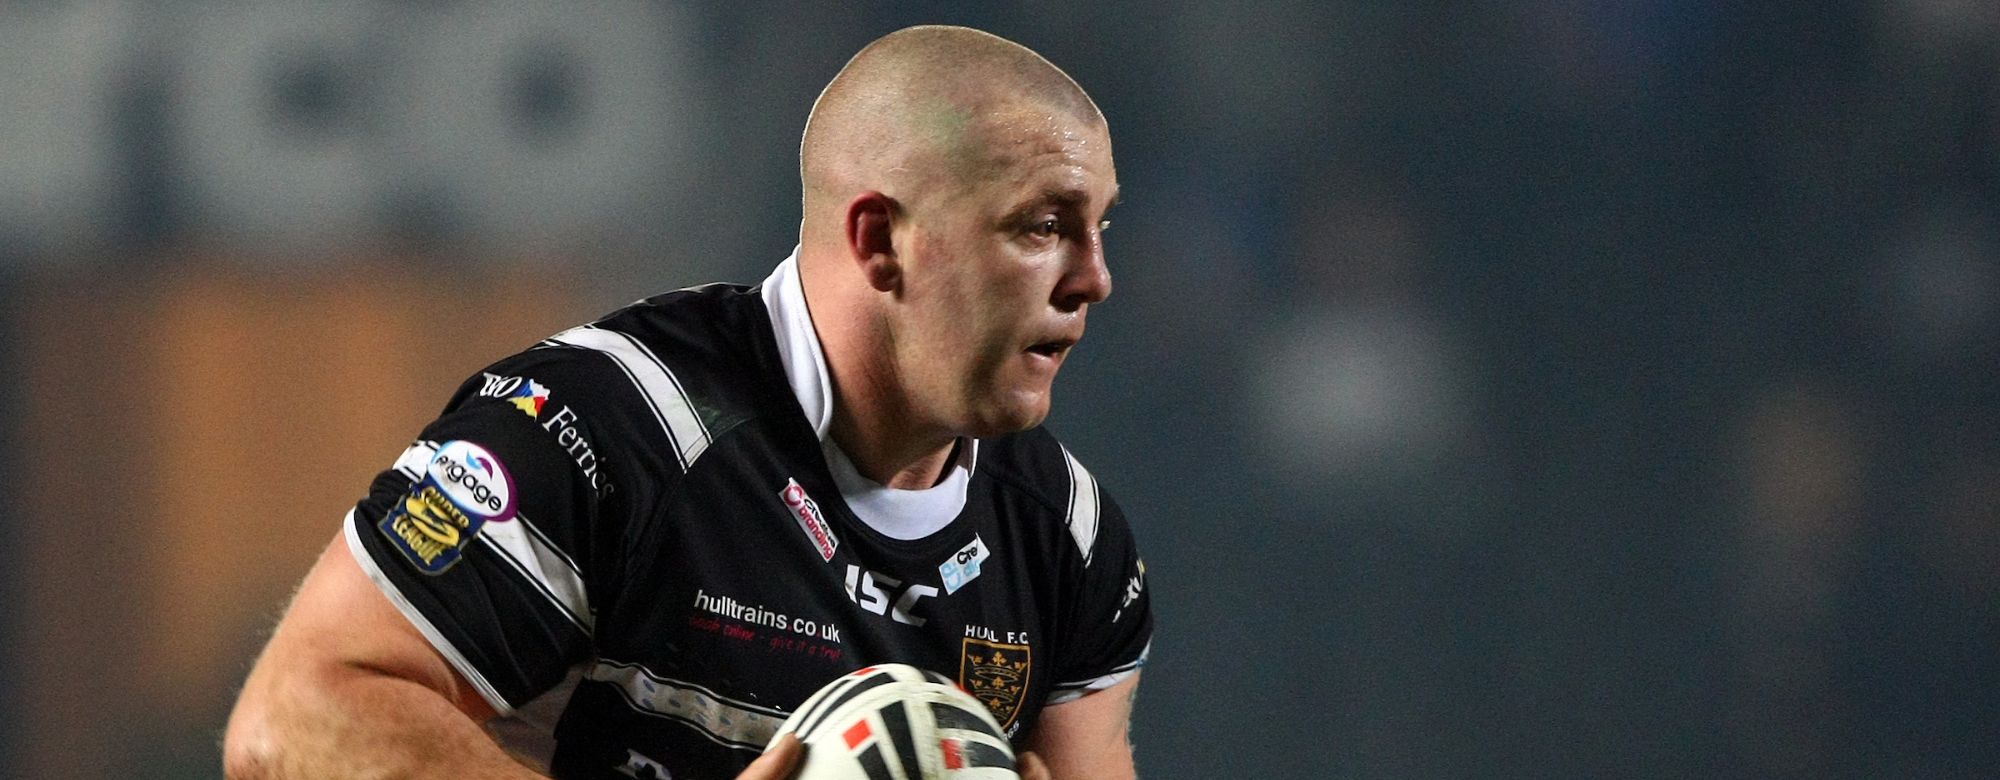 Hoy & Clifford Solid Additions, Says Former Hull Star O’Meley